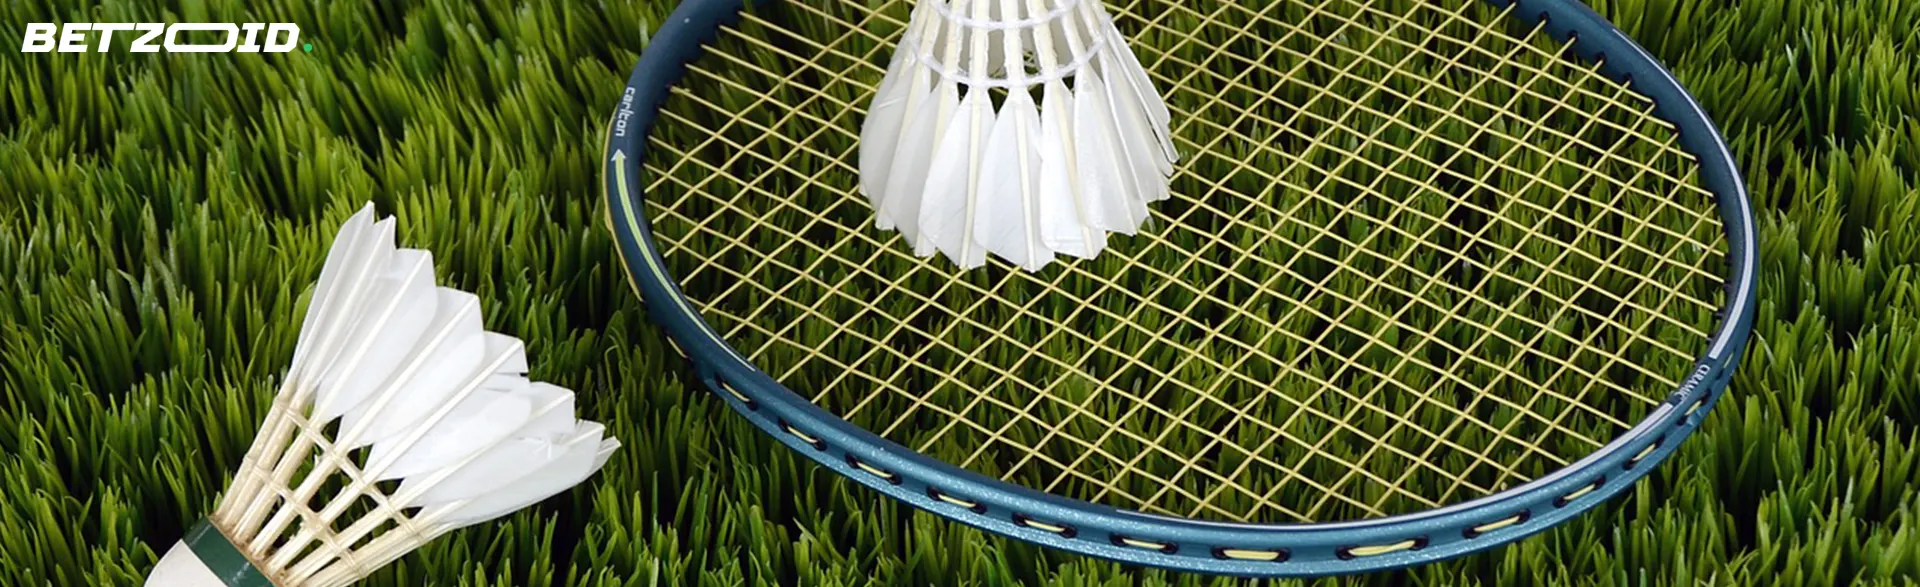 Badminton racket and shuttlecock on a grassy surface.